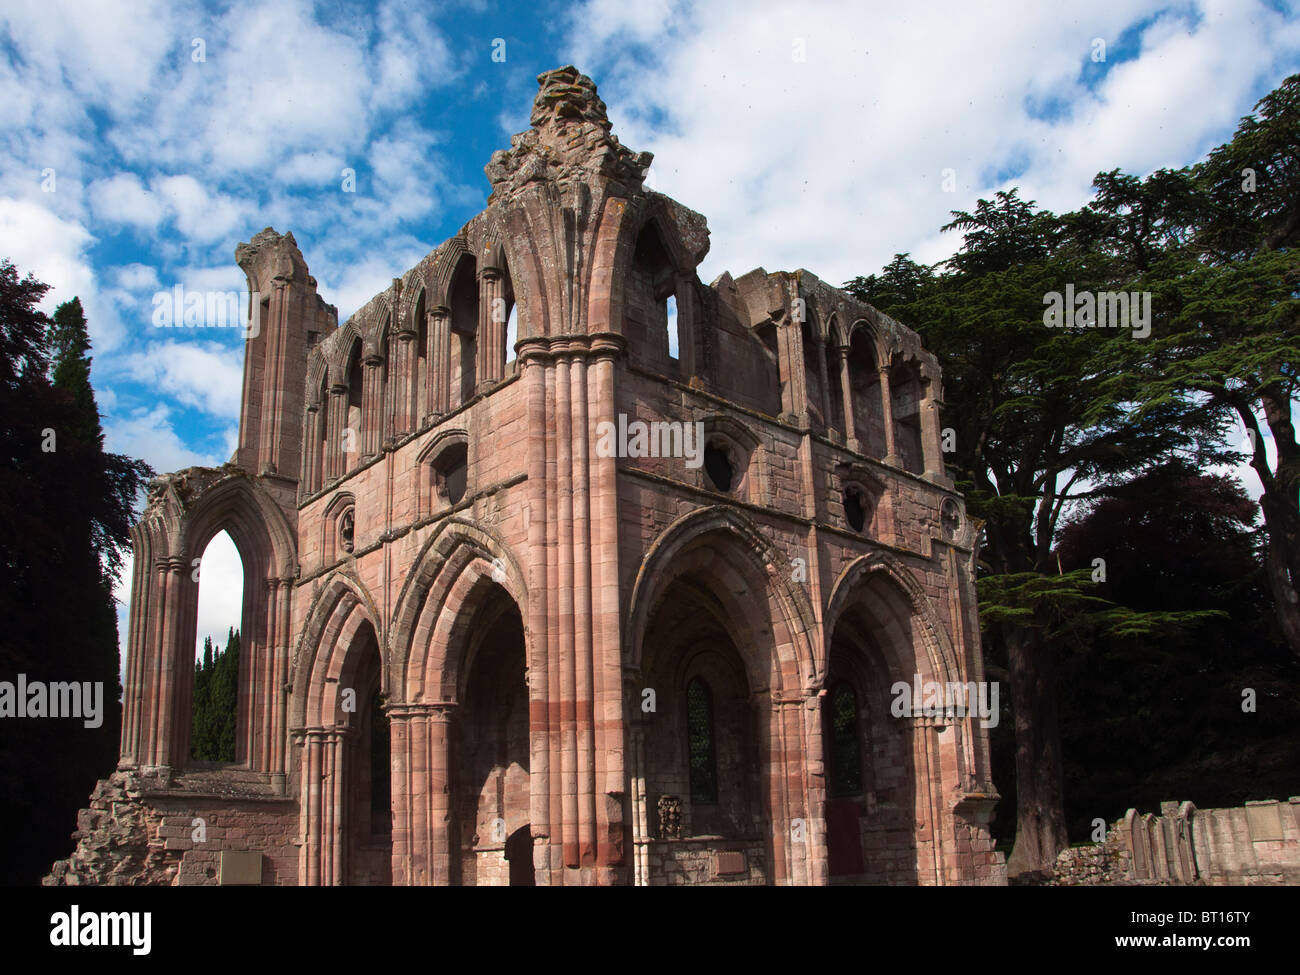 The ruined medieval architecture of Dryburgh Abbey in the Scottish borders, Dryburgh, Scotland. Stock Photo